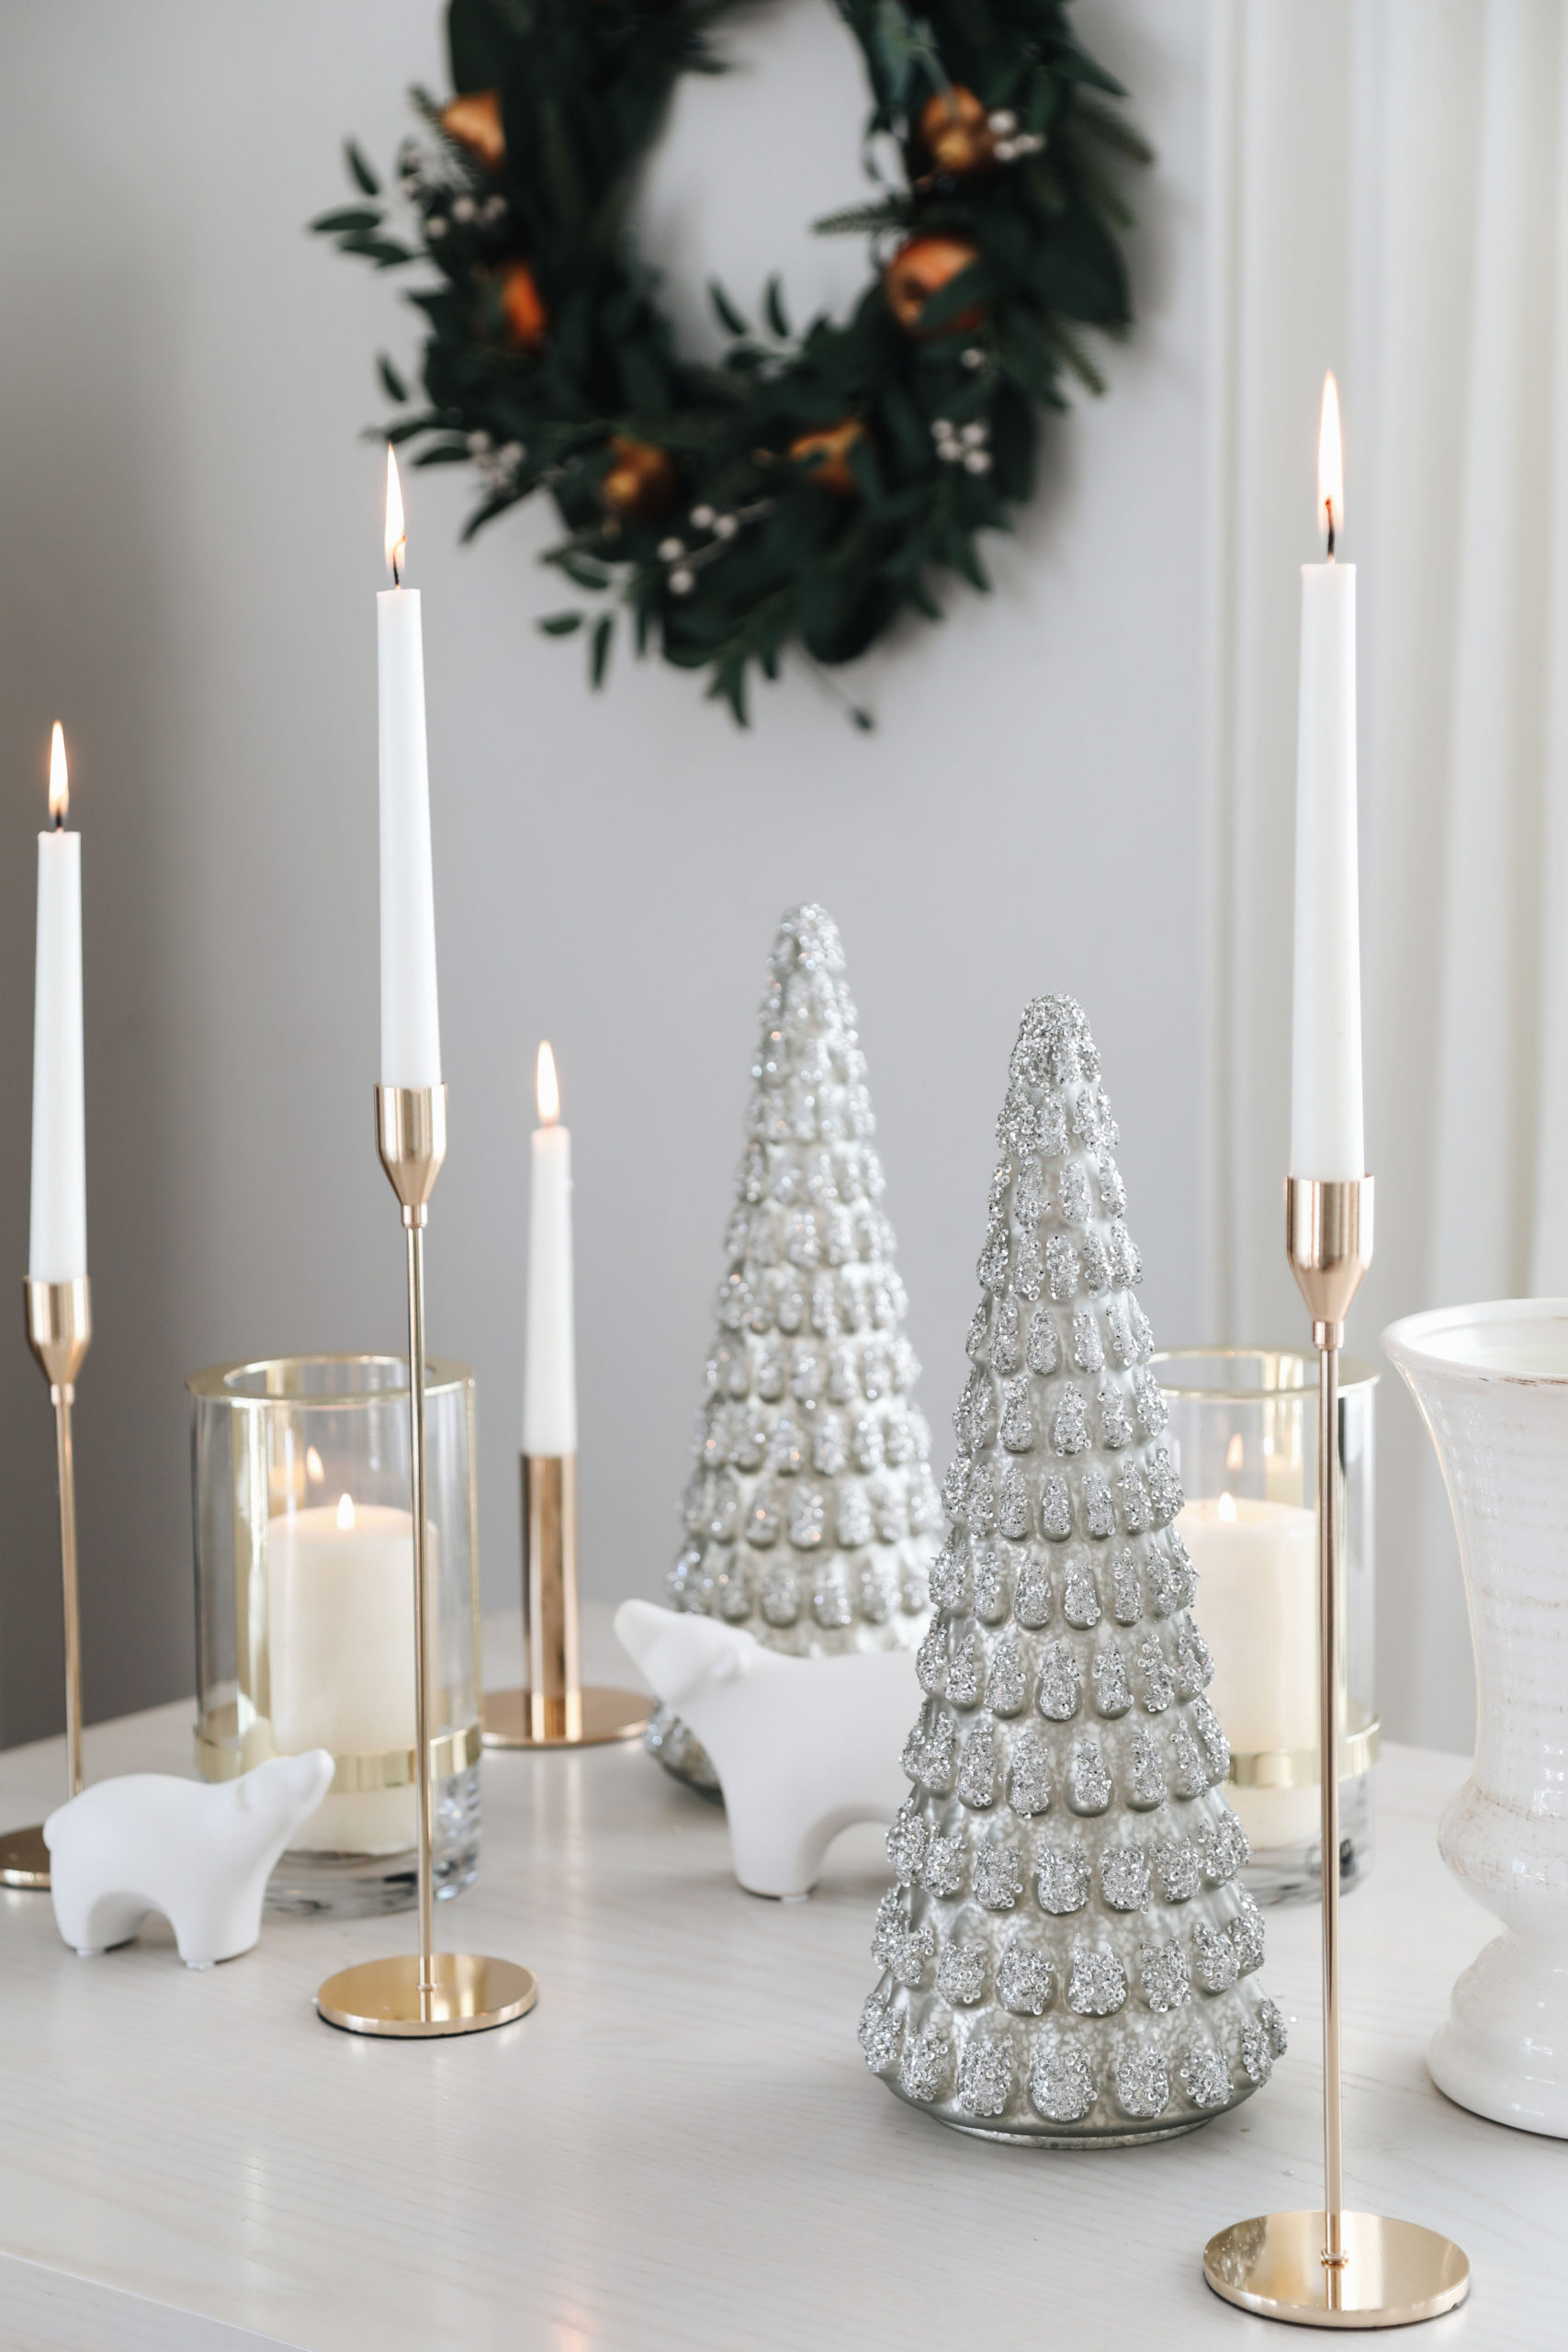 modern holiday tablescape